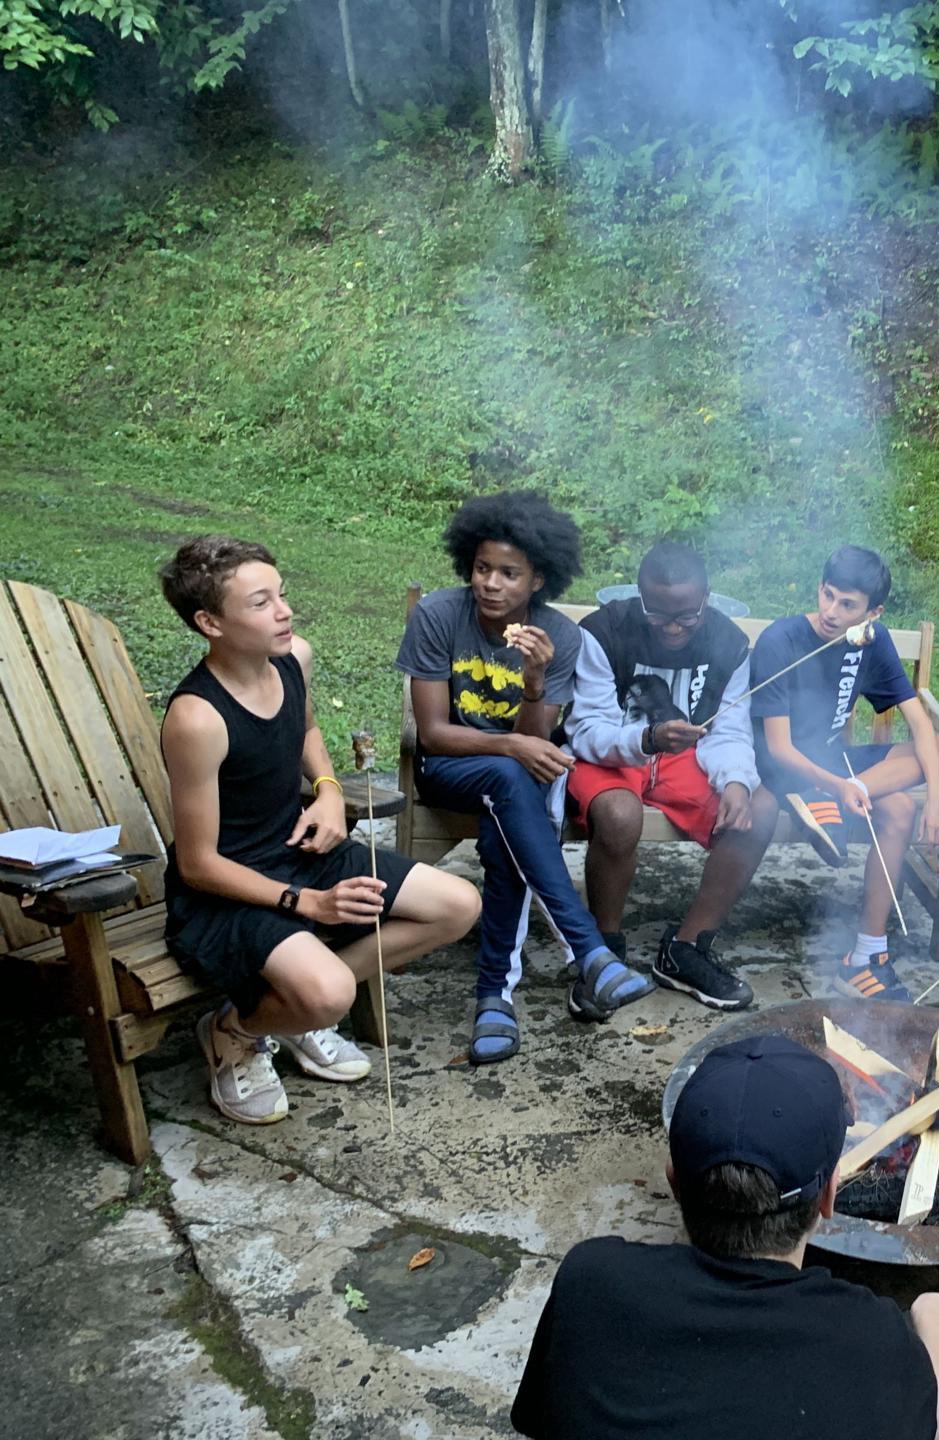 A group of teenagers sitting around a campfire in an outdoor setting